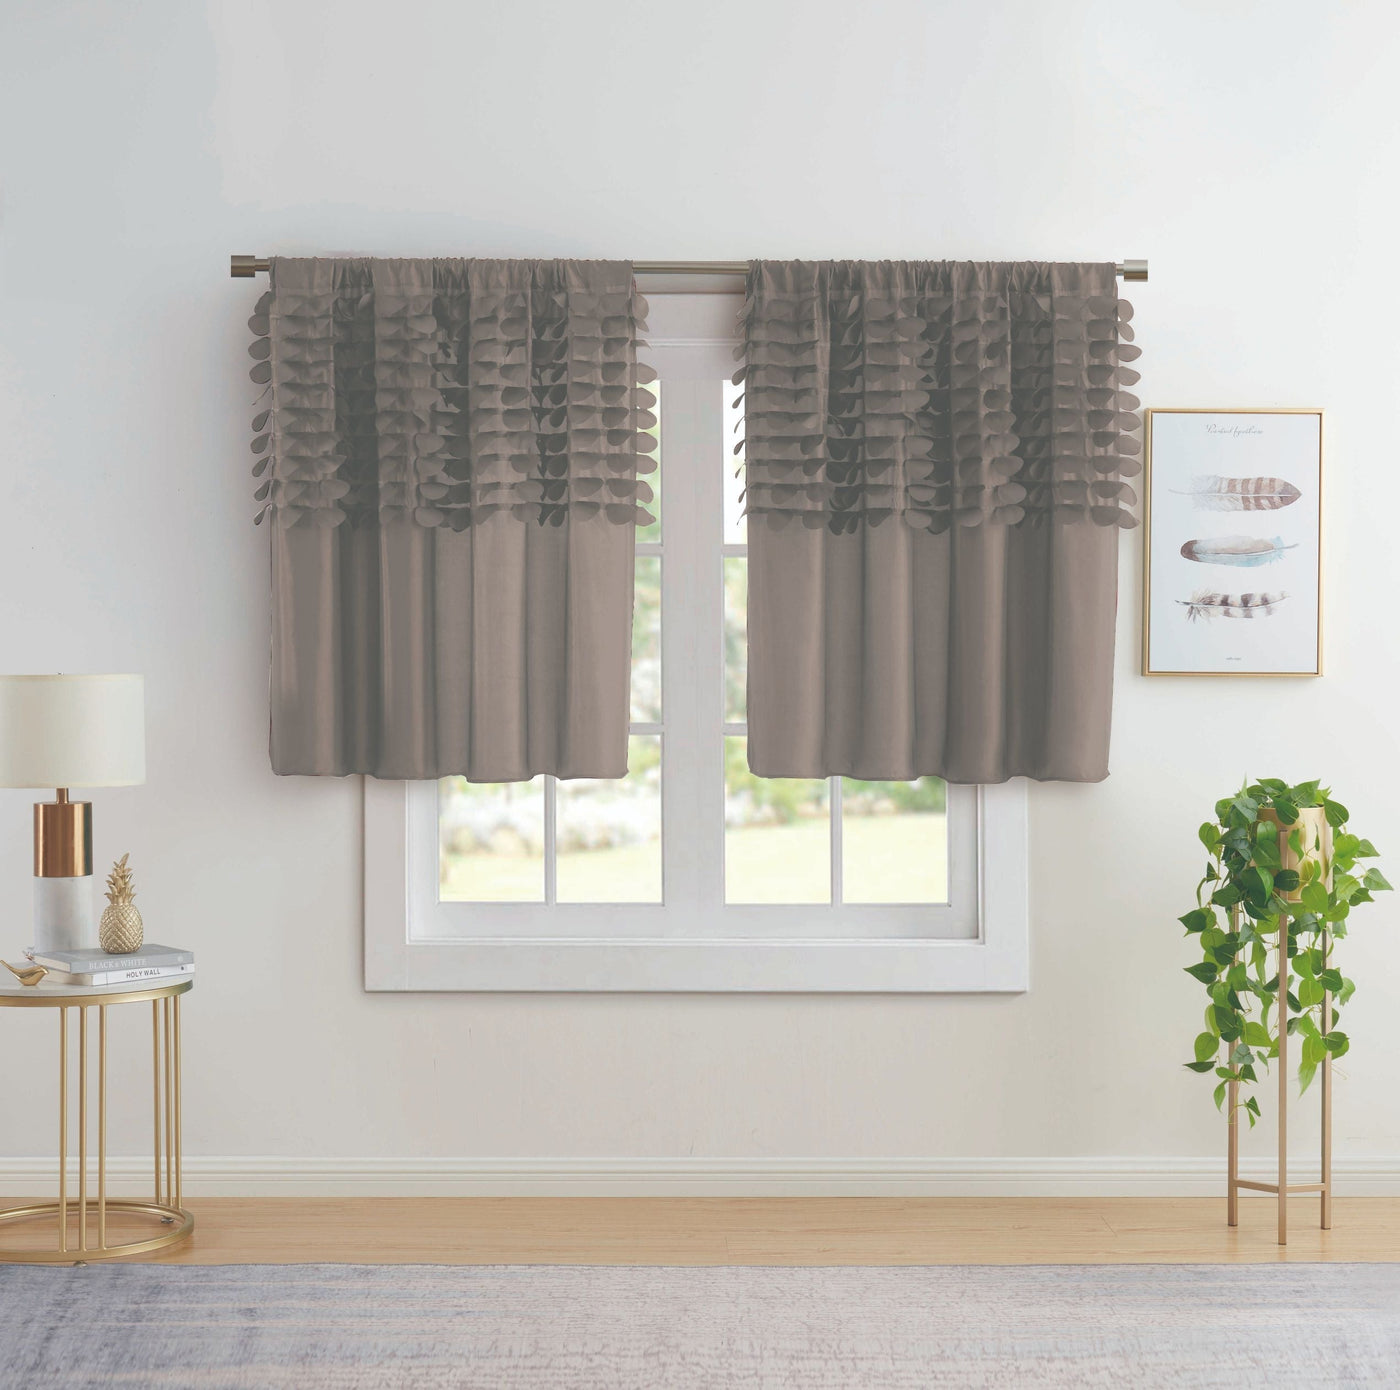 2pc Jenin-Home-Furnishing. Circle Dream Rod Pocket Curtains For Bedroom Curtains 2 Panel Sets 108" Wide Tafetta Curtain Panel Window Treatment Curtains For Living Room